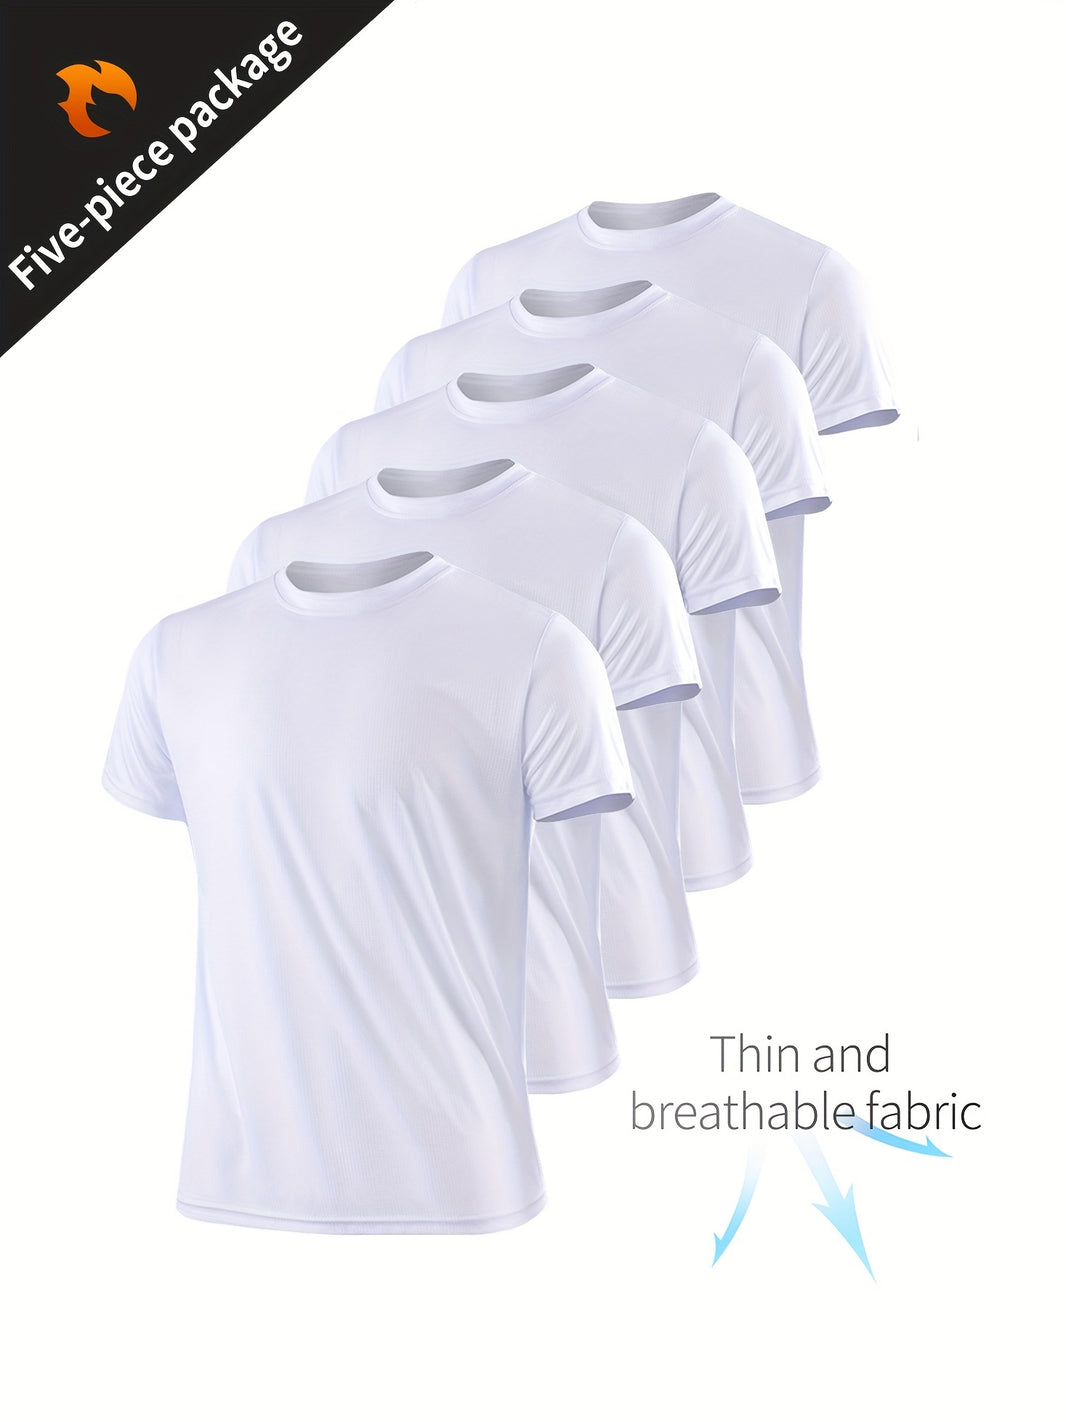 5pcs Breathable Quick Drying Men's Sport T-Shirt For Fitness, Gym, And Running - Sweat Absorbing And Bodybuilding Shirt